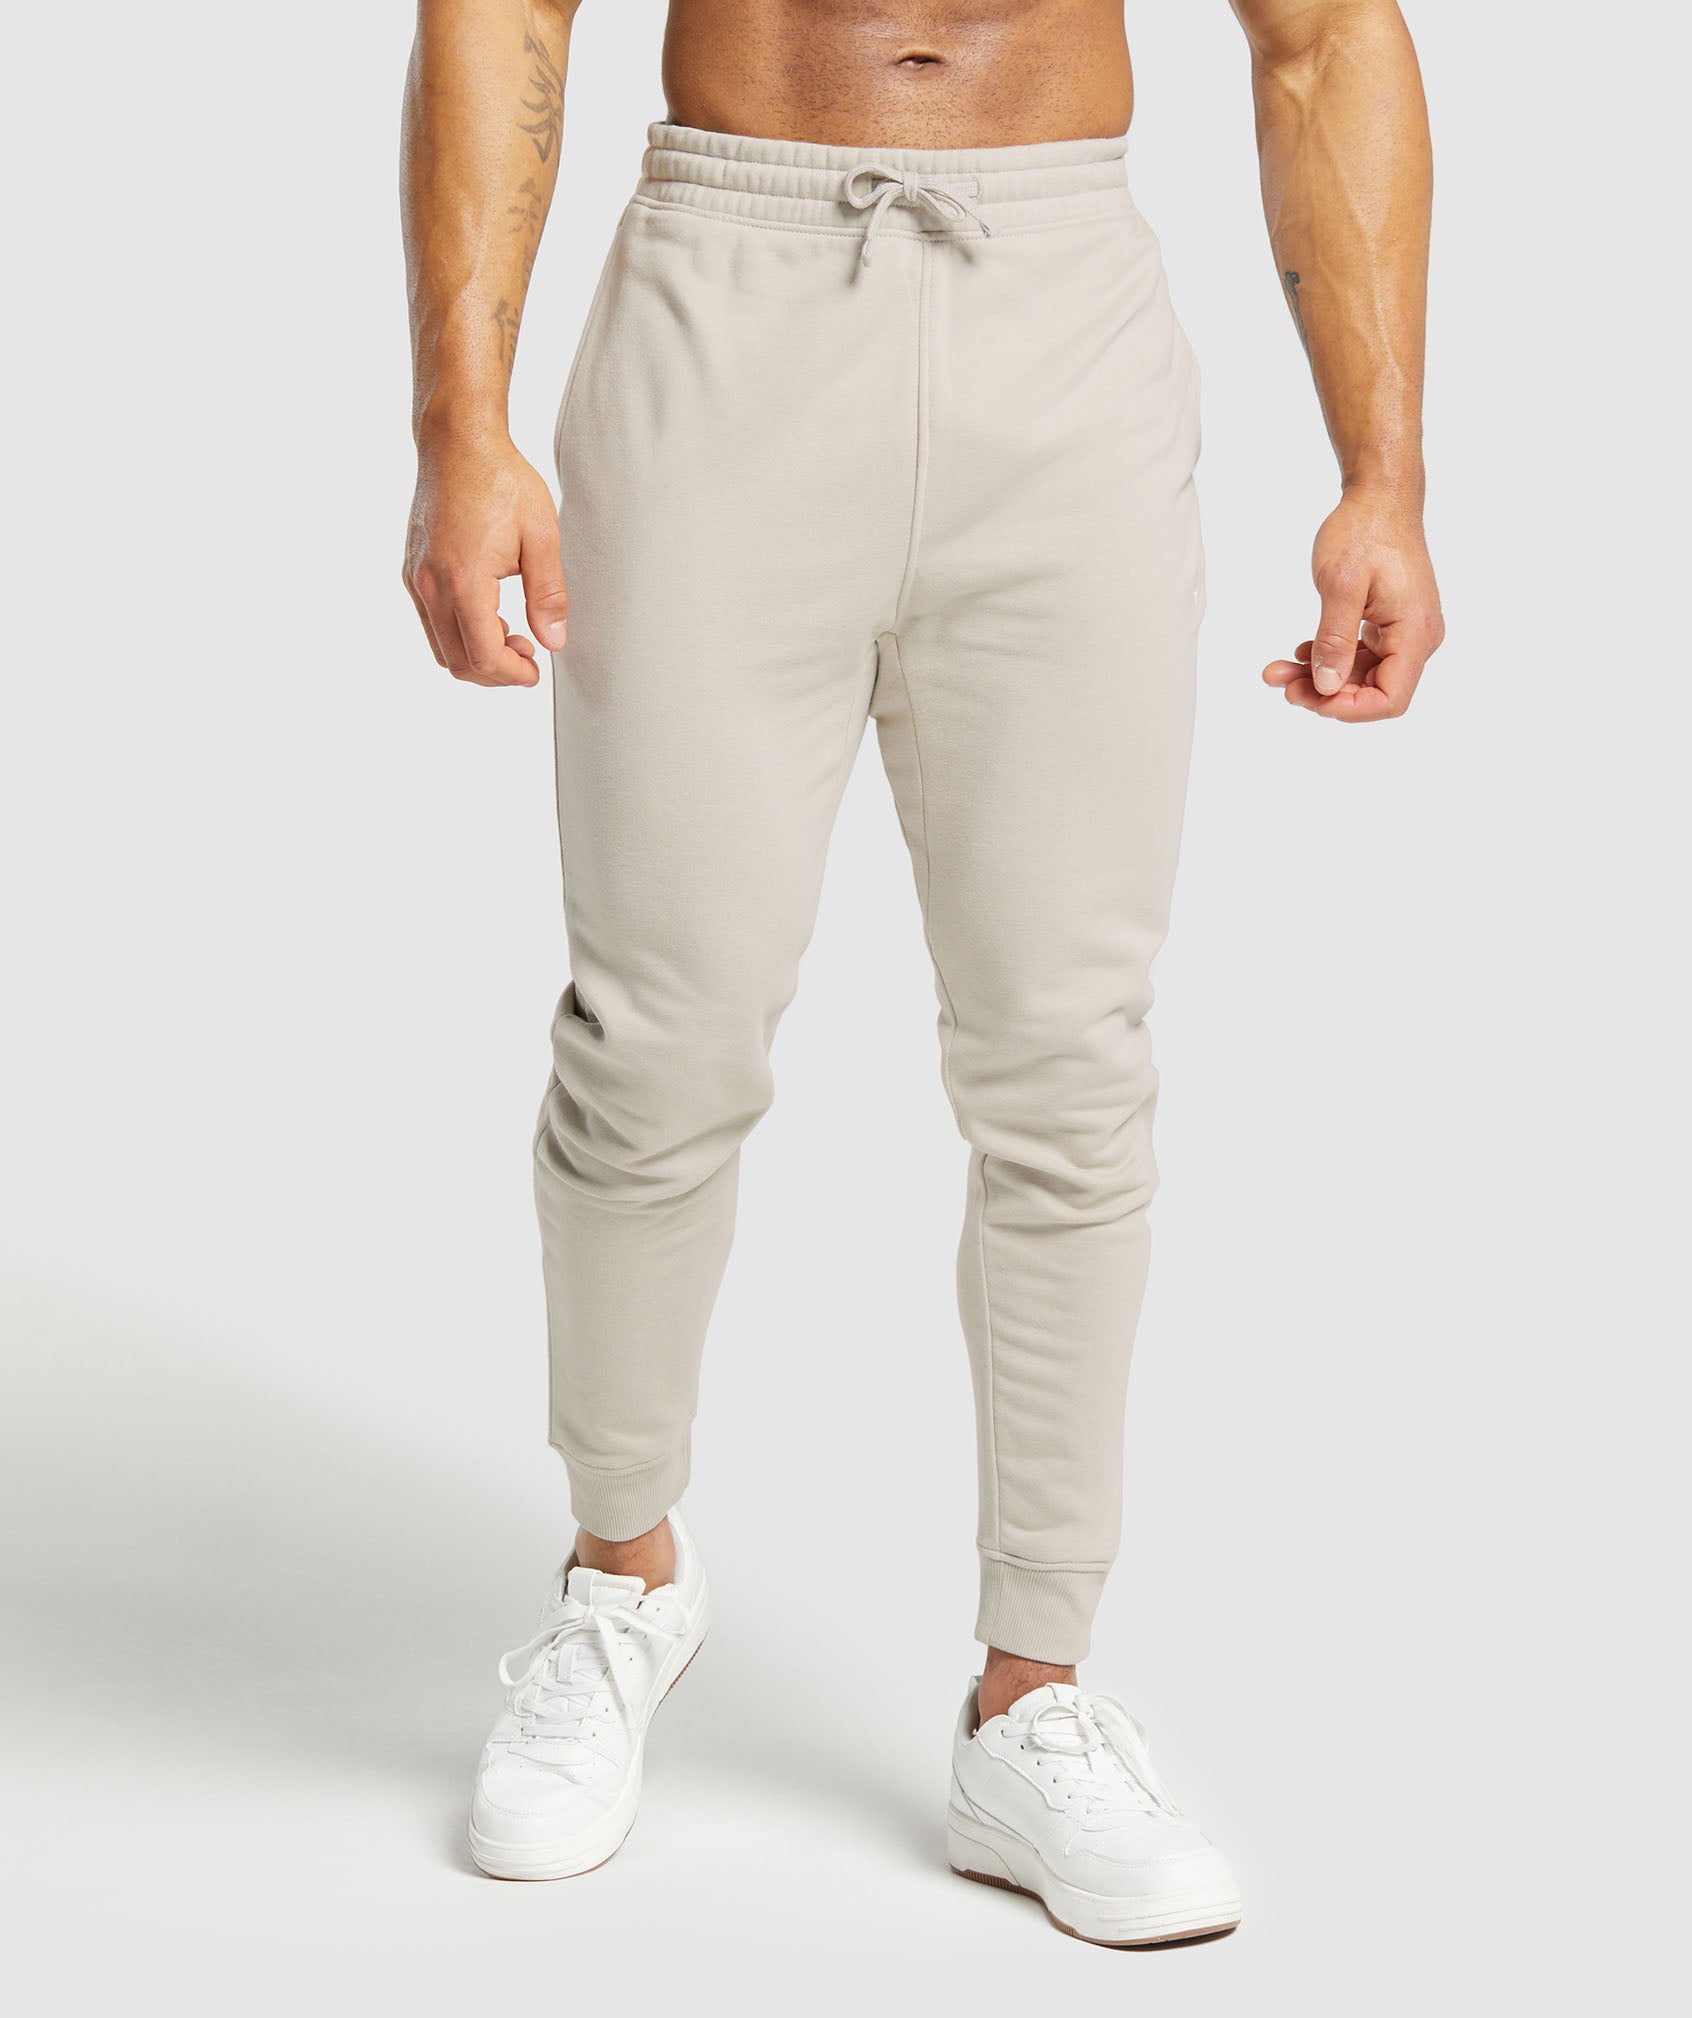 Crest Joggers in {{variantColor} is out of stock